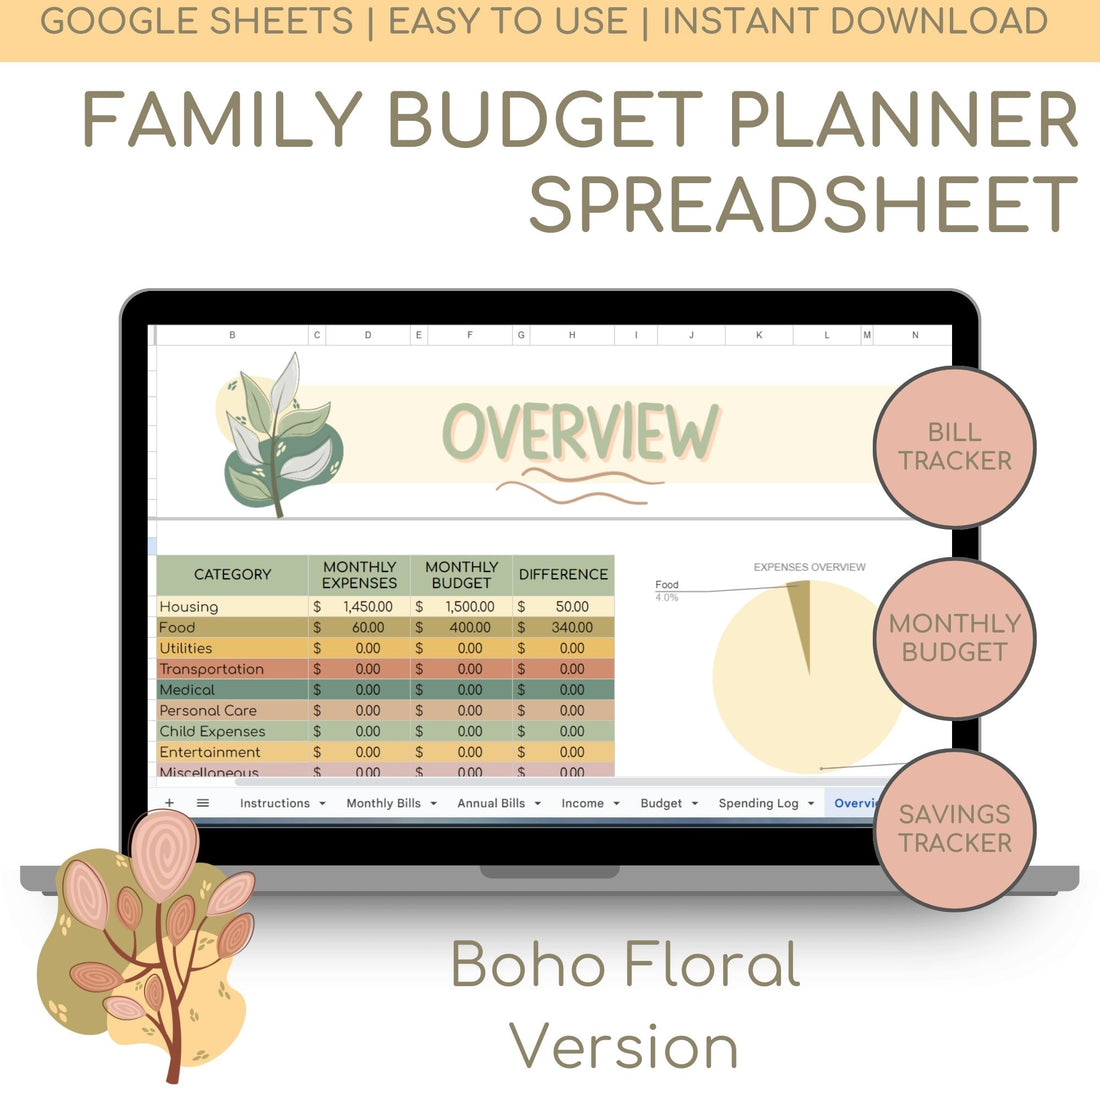 Overall features of the Family Budget Planner Spreadsheet shown in Boho Floral